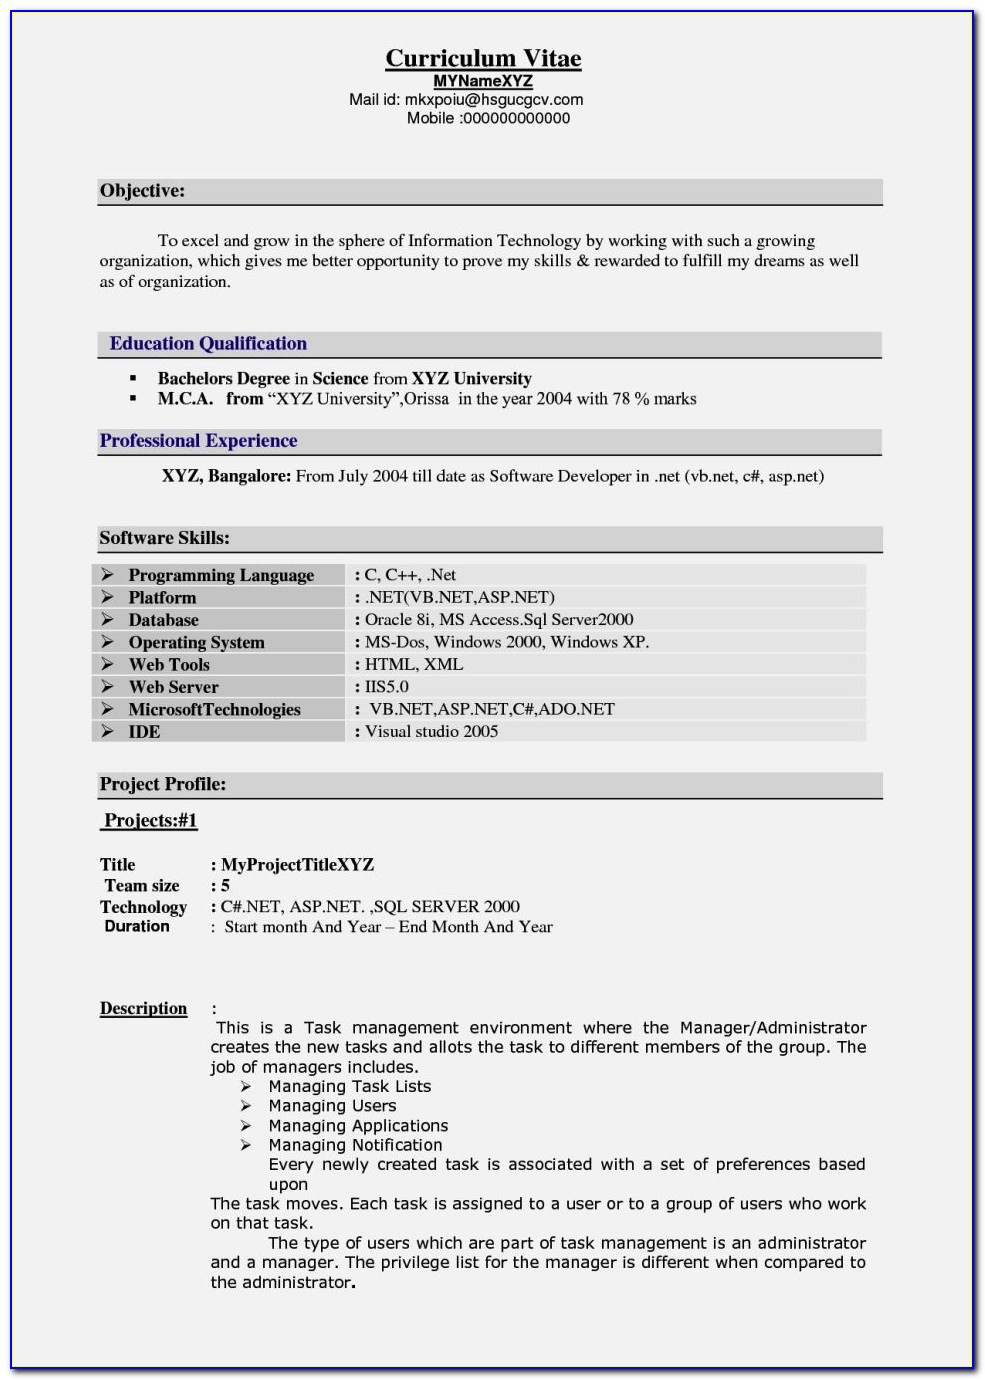 Experience Resume Format Doc Download